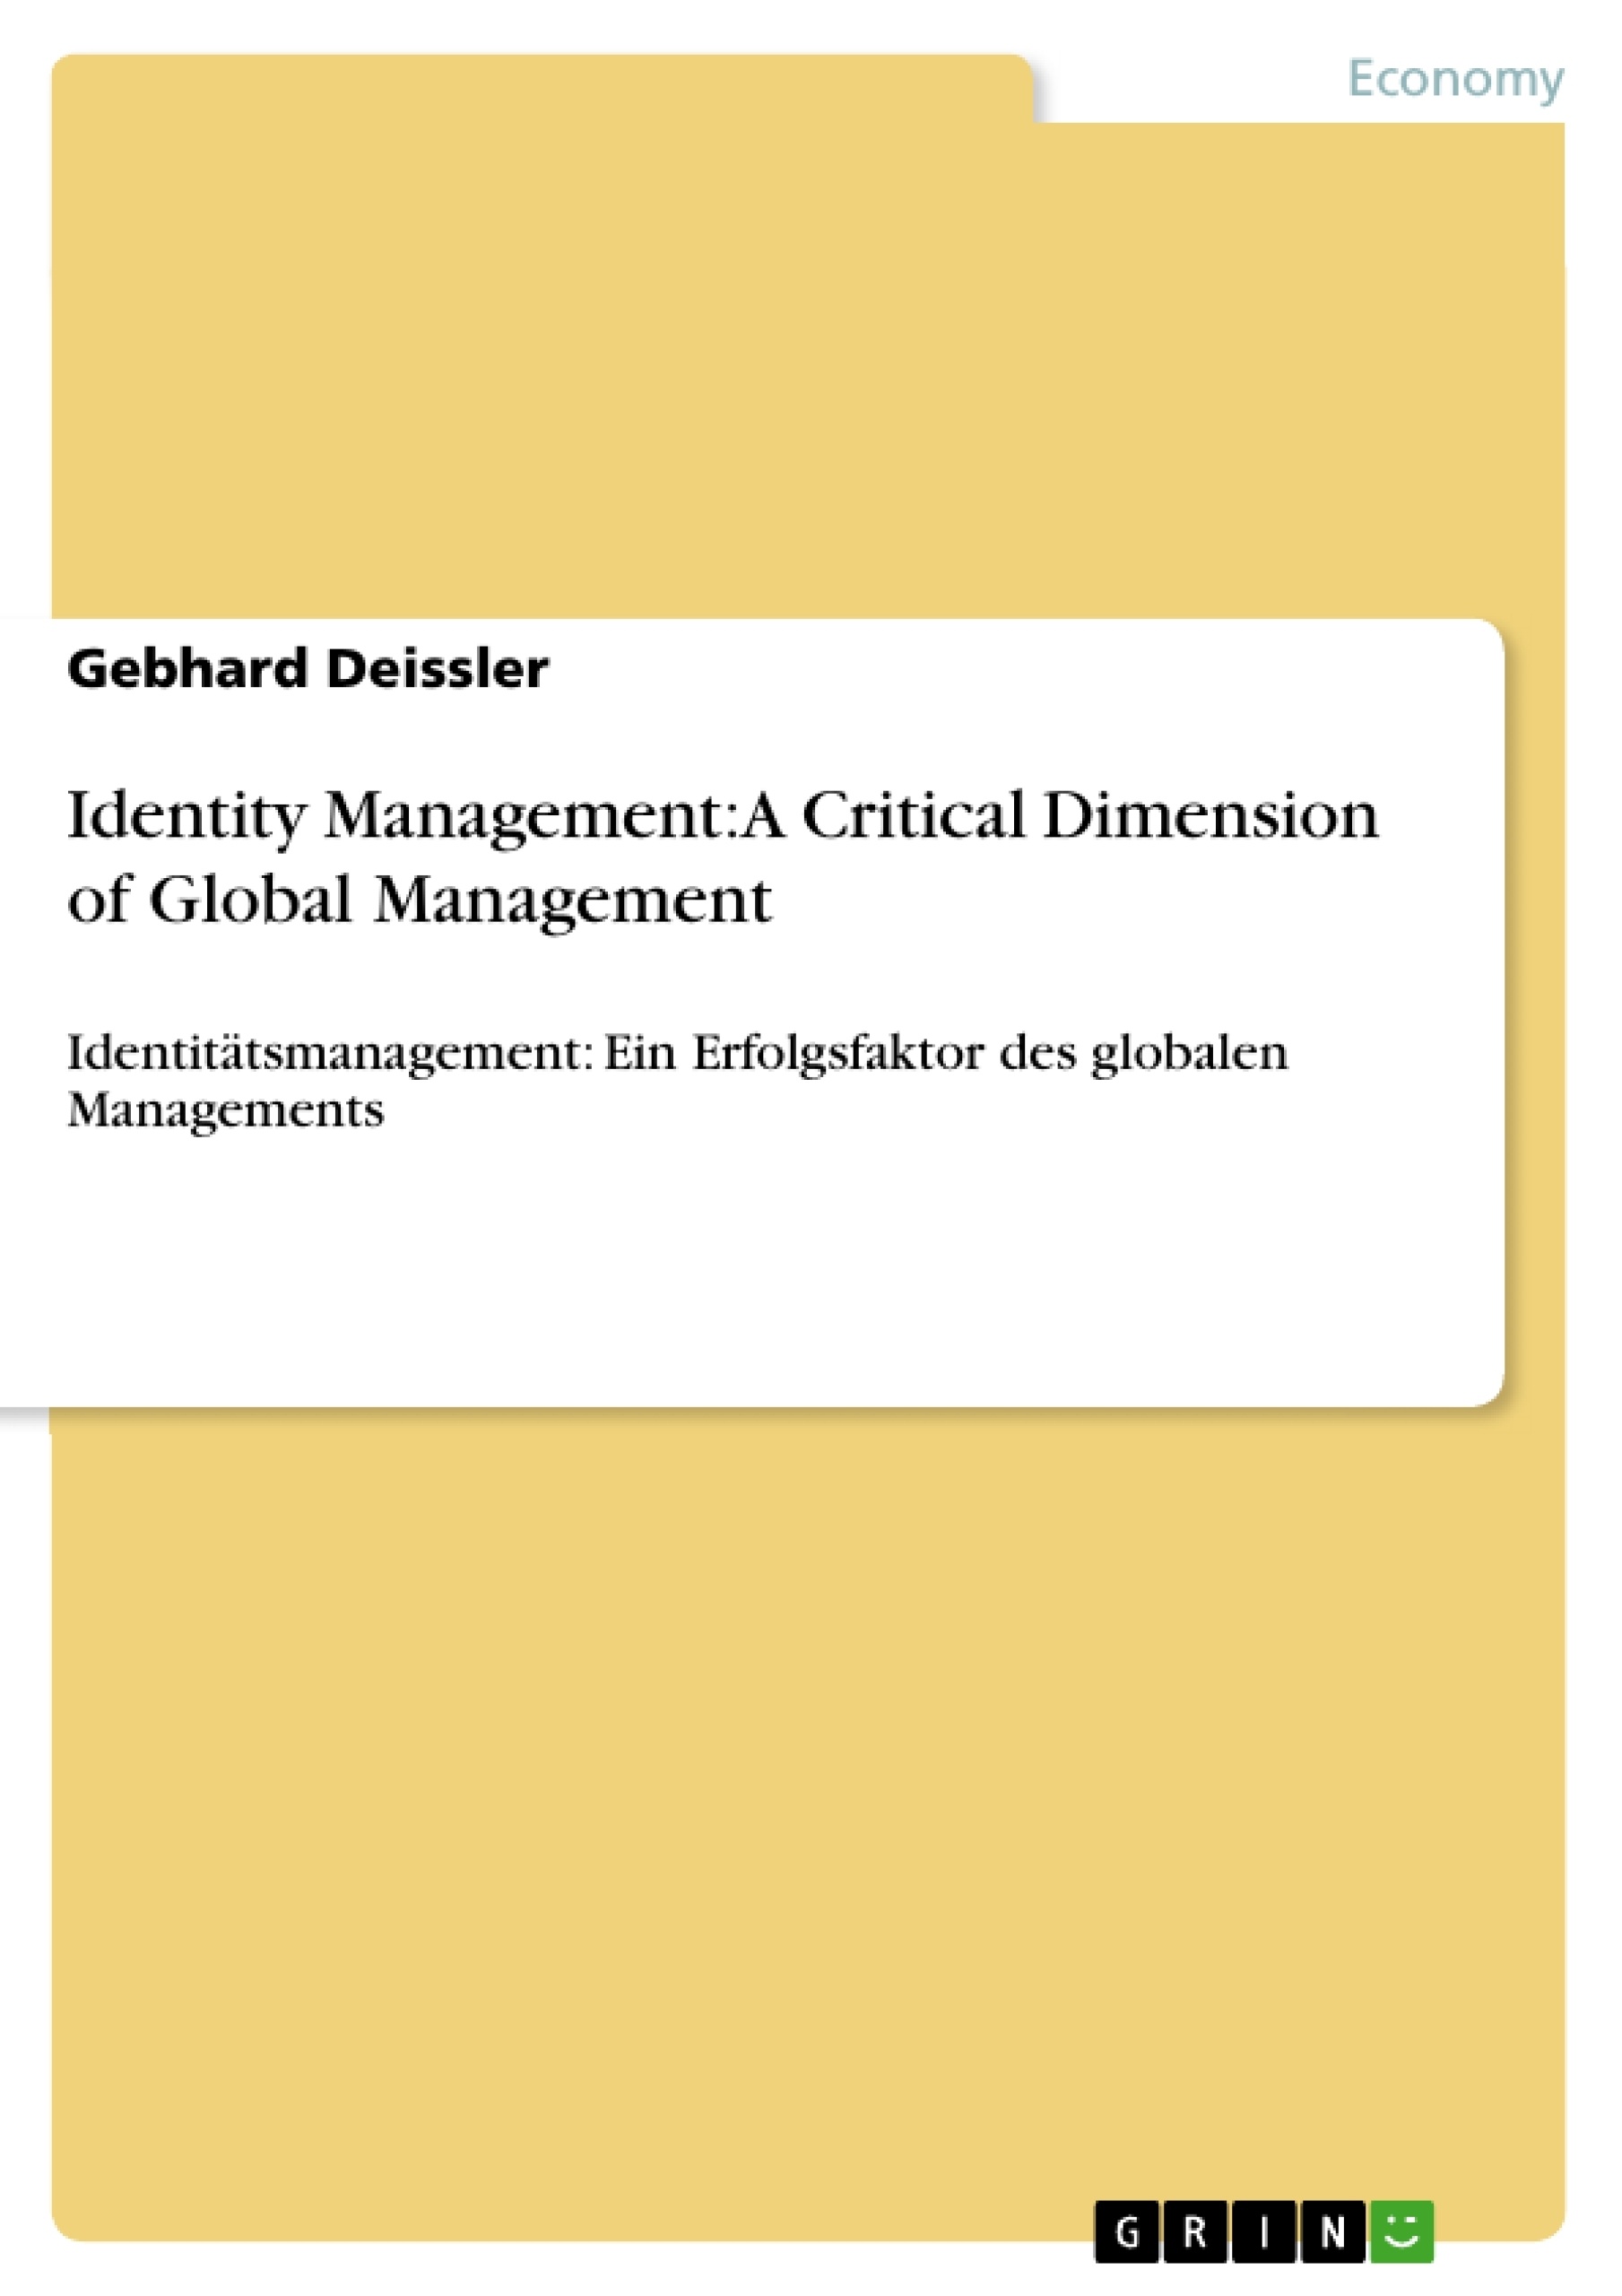 Title: Identity Management: A Critical Dimension of Global Management